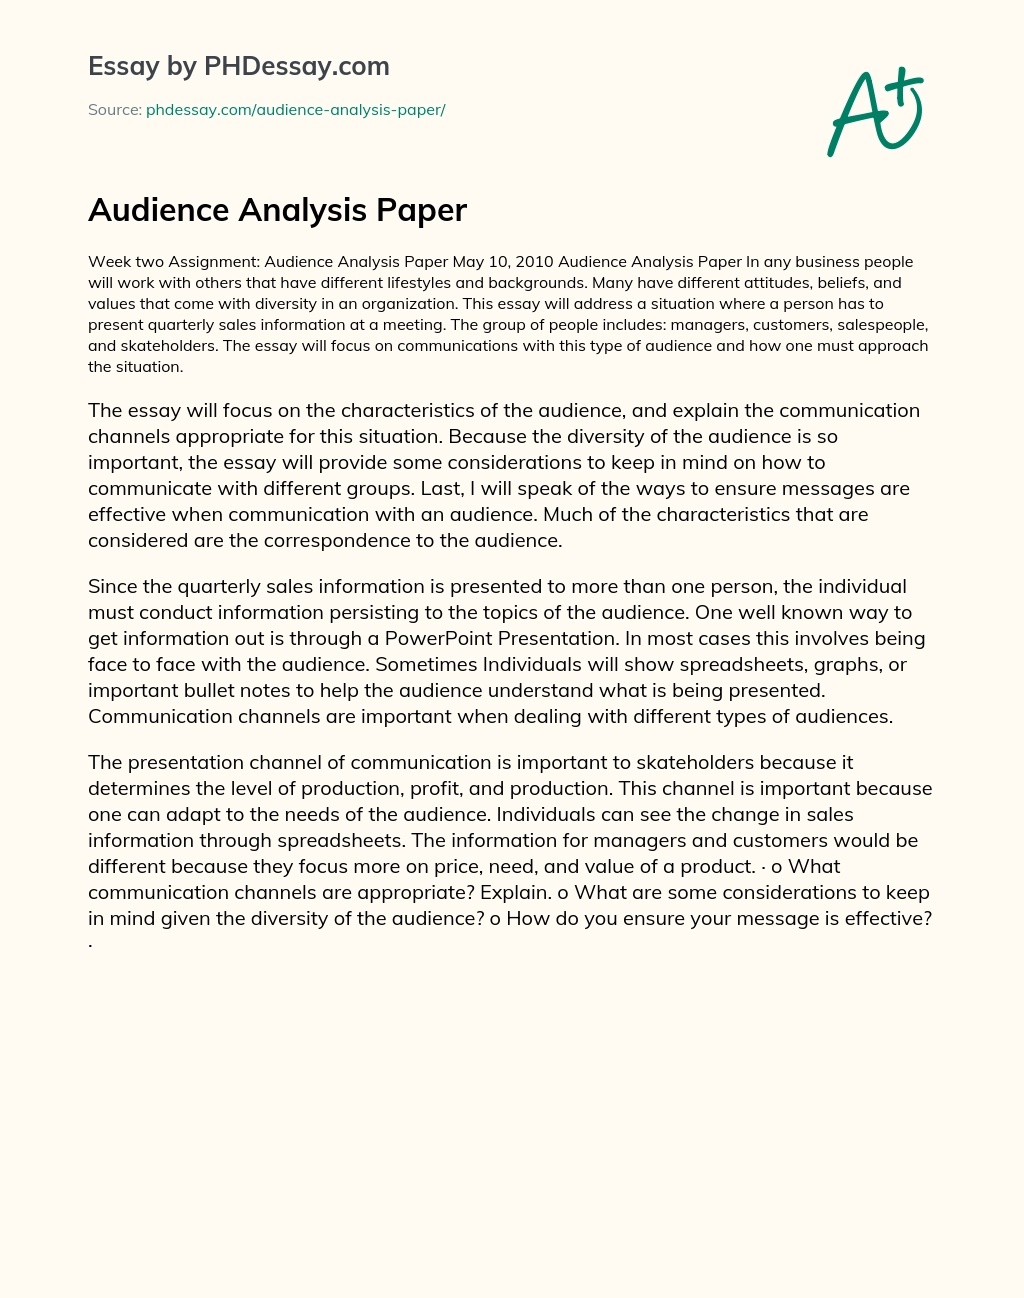 Audience Analysis Paper essay